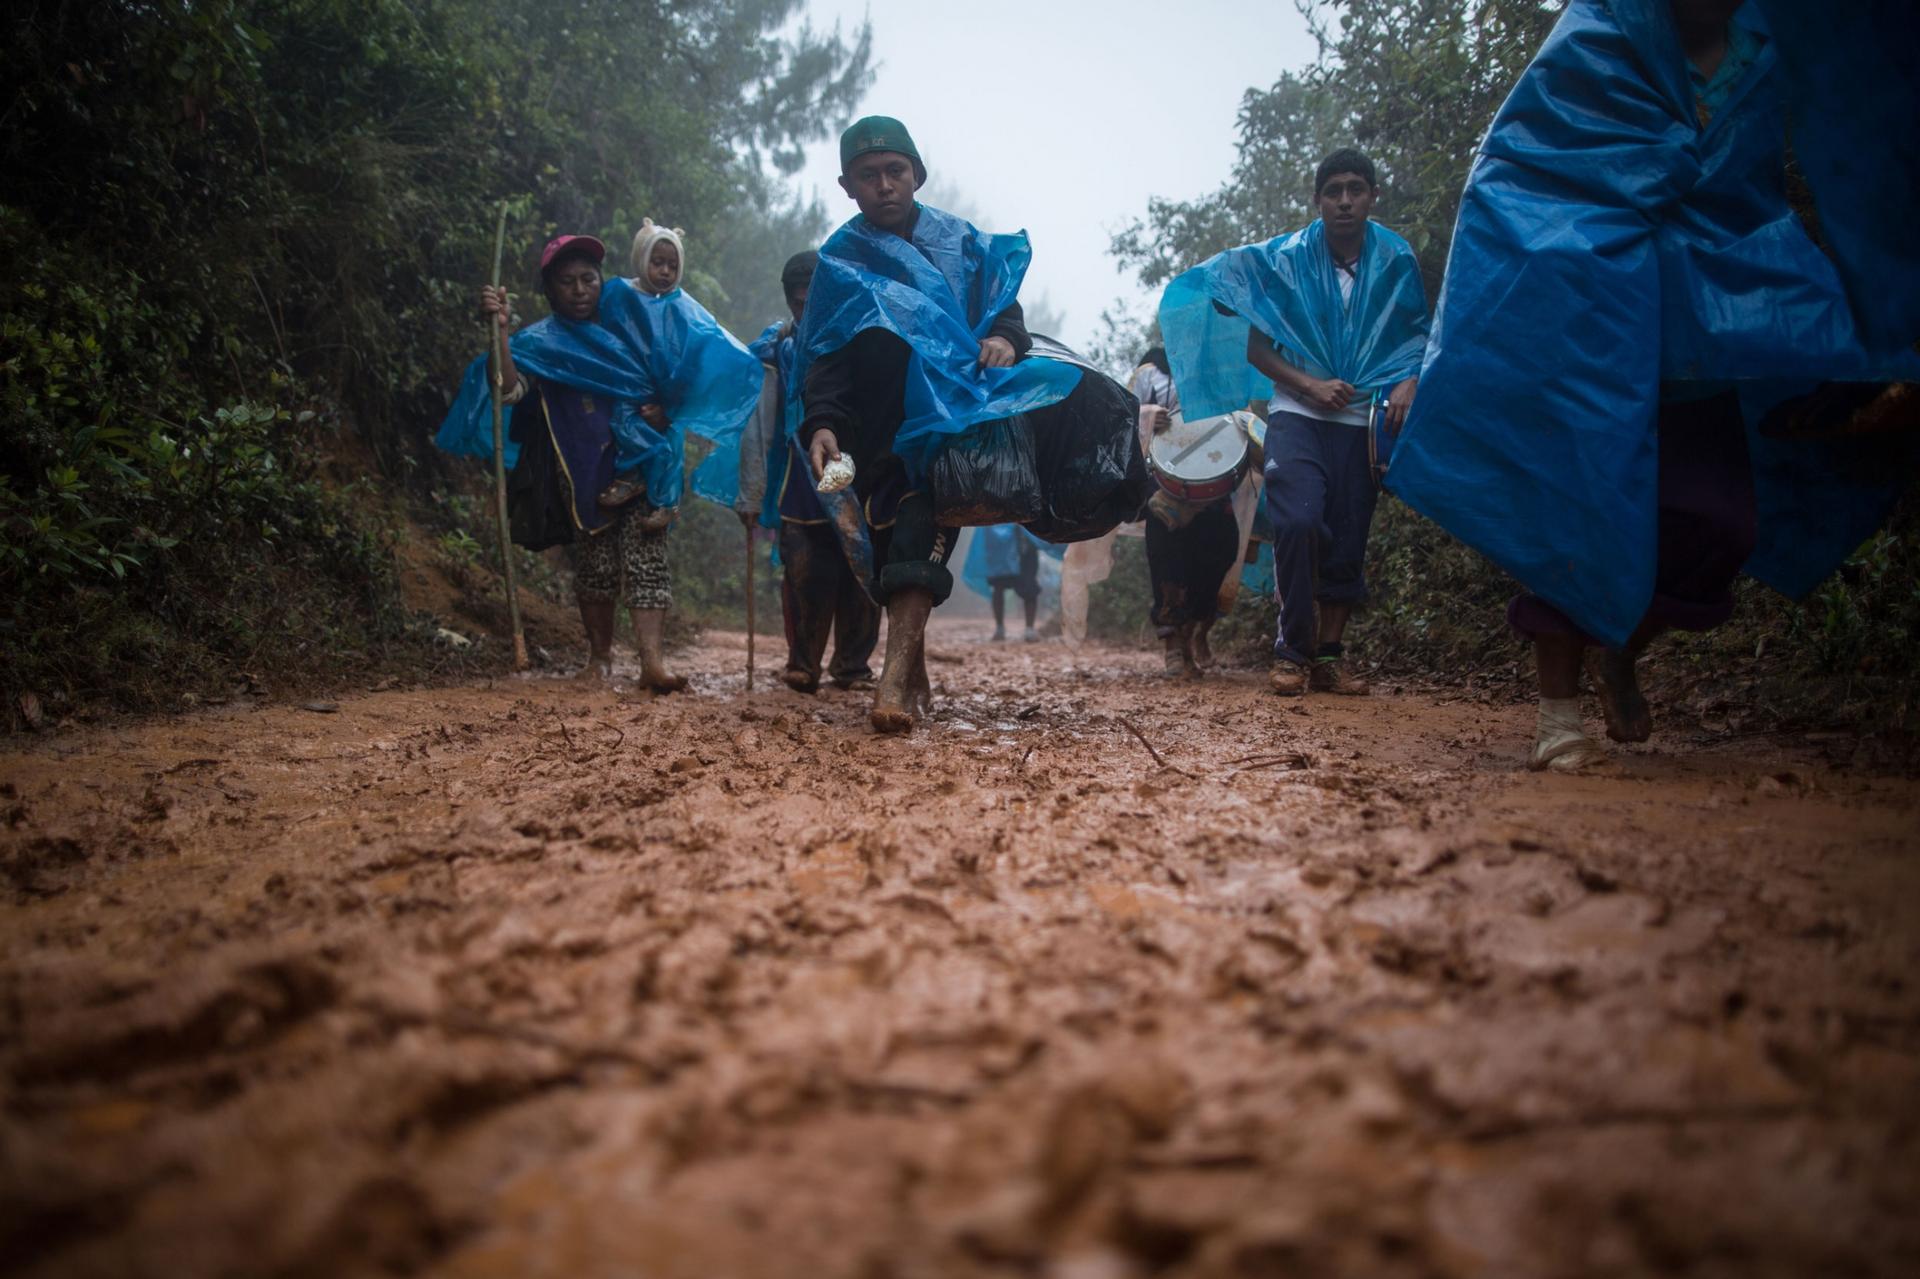 Several people are shown walking along a muddy path and wearing blue rain ponchos.